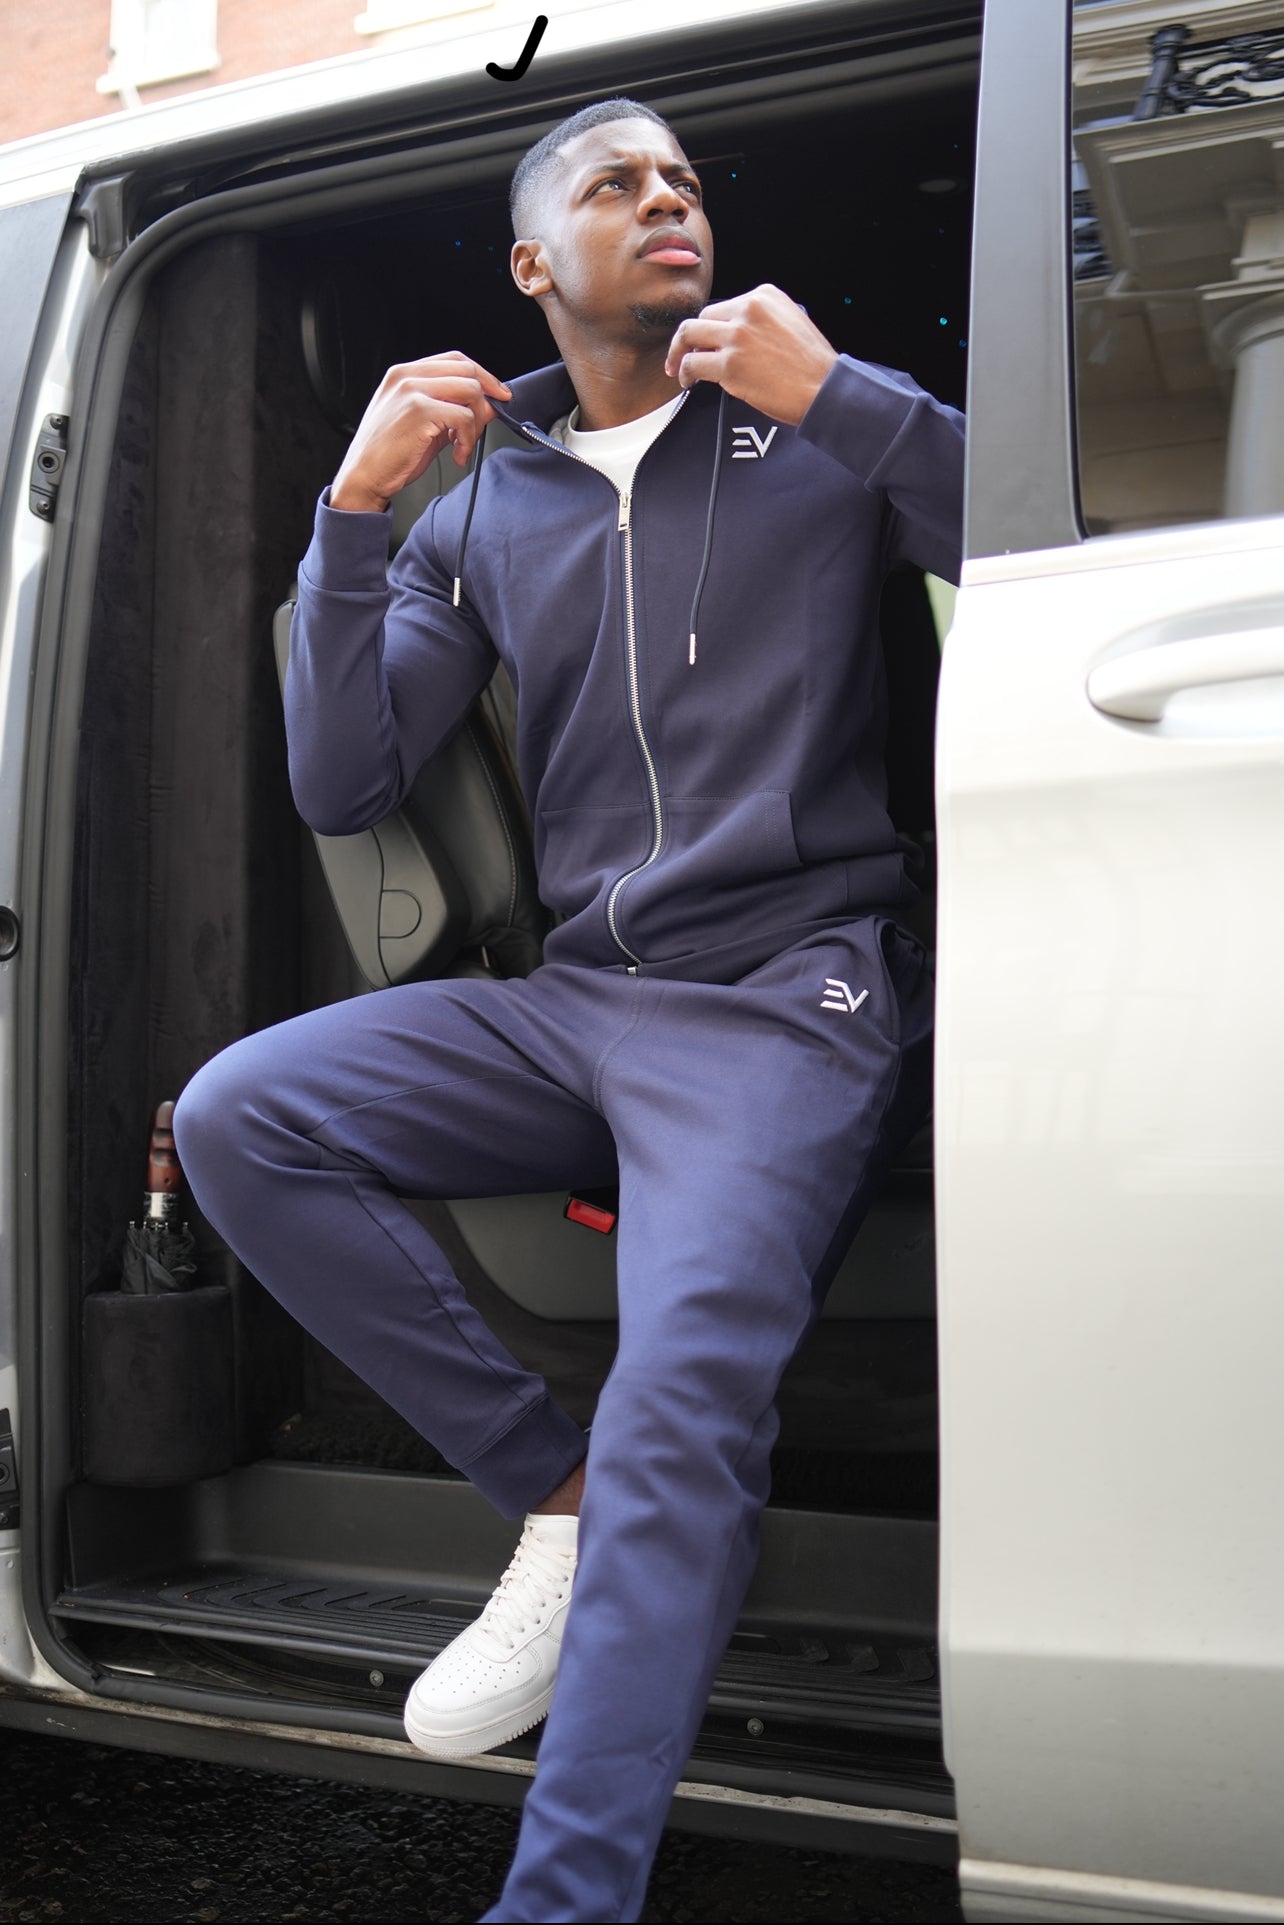 EV LUXE TRACKSUIT “NAVY”